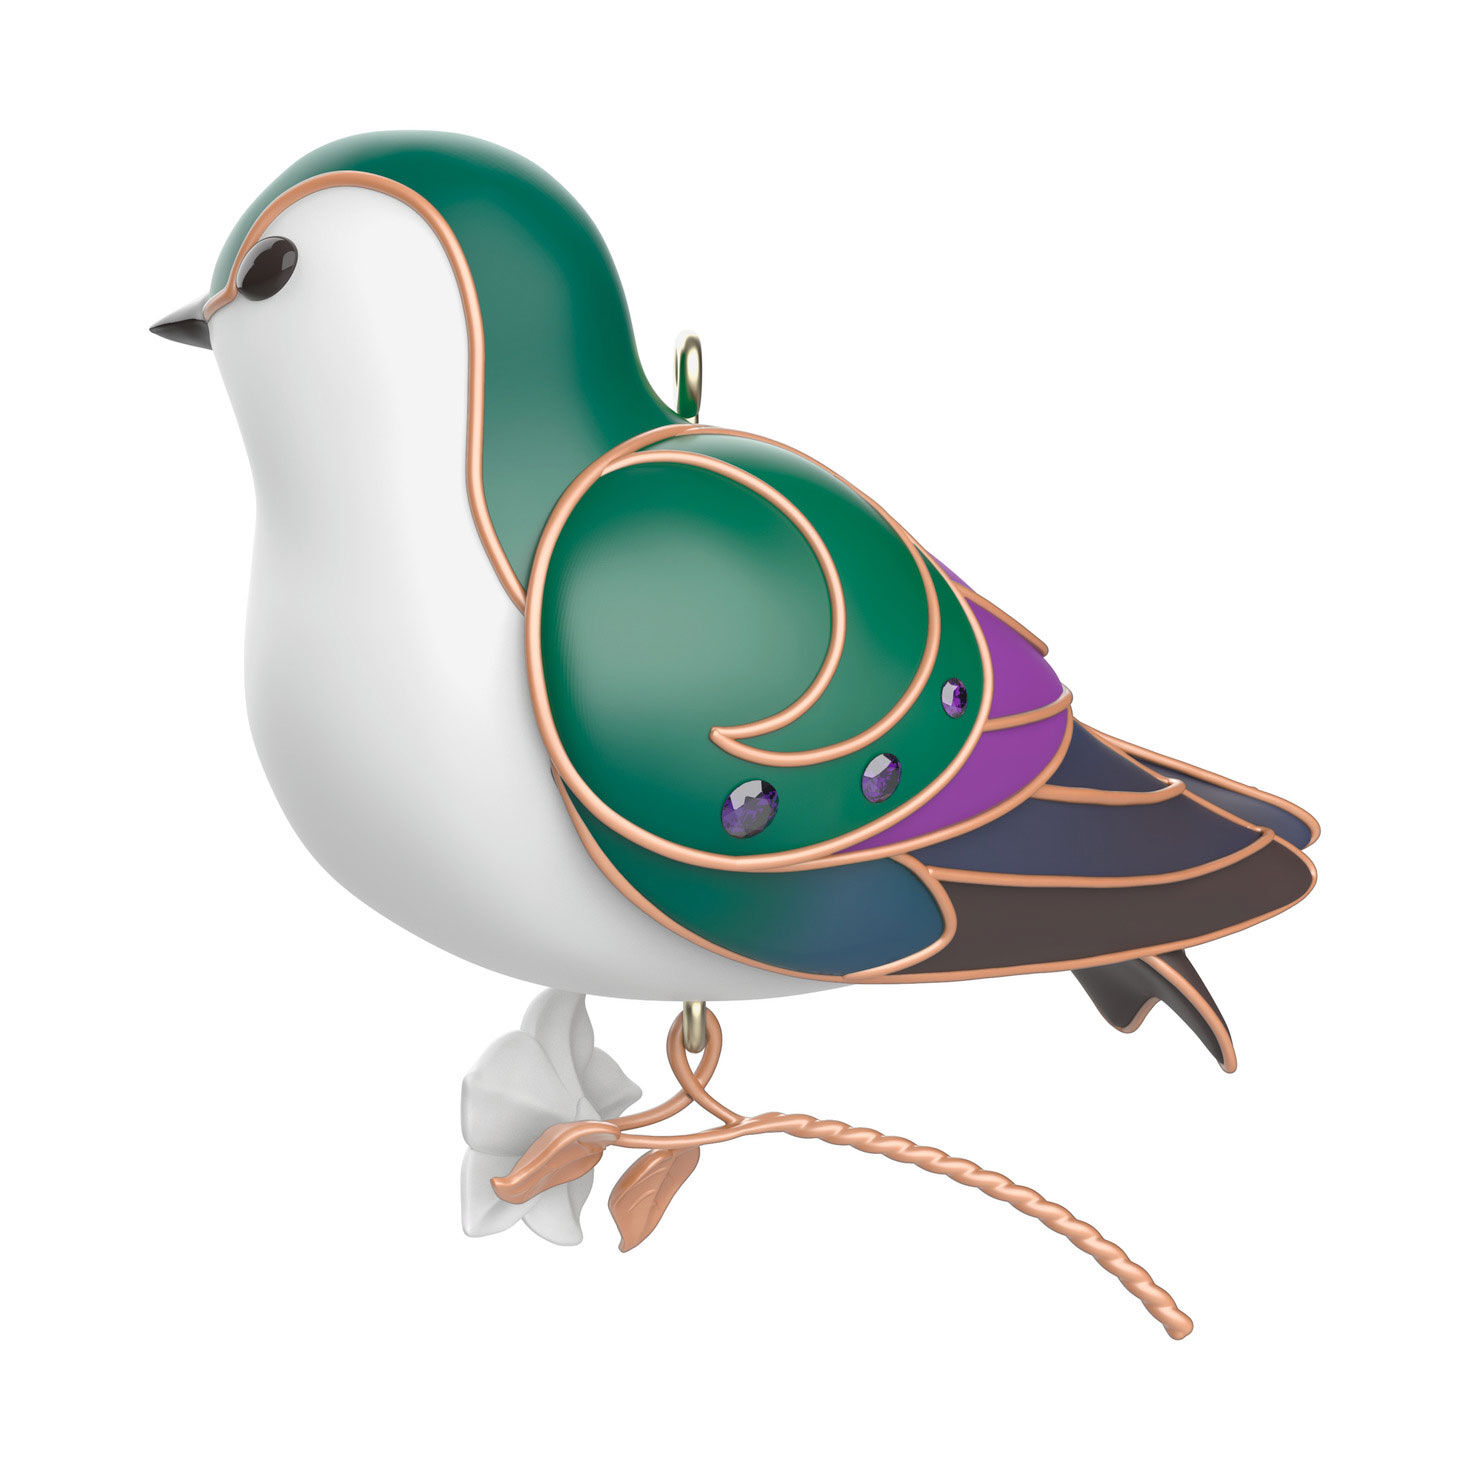 The Beauty of Birds Violet-Green Swallow Ornament for only USD 17.99 | Hallmark